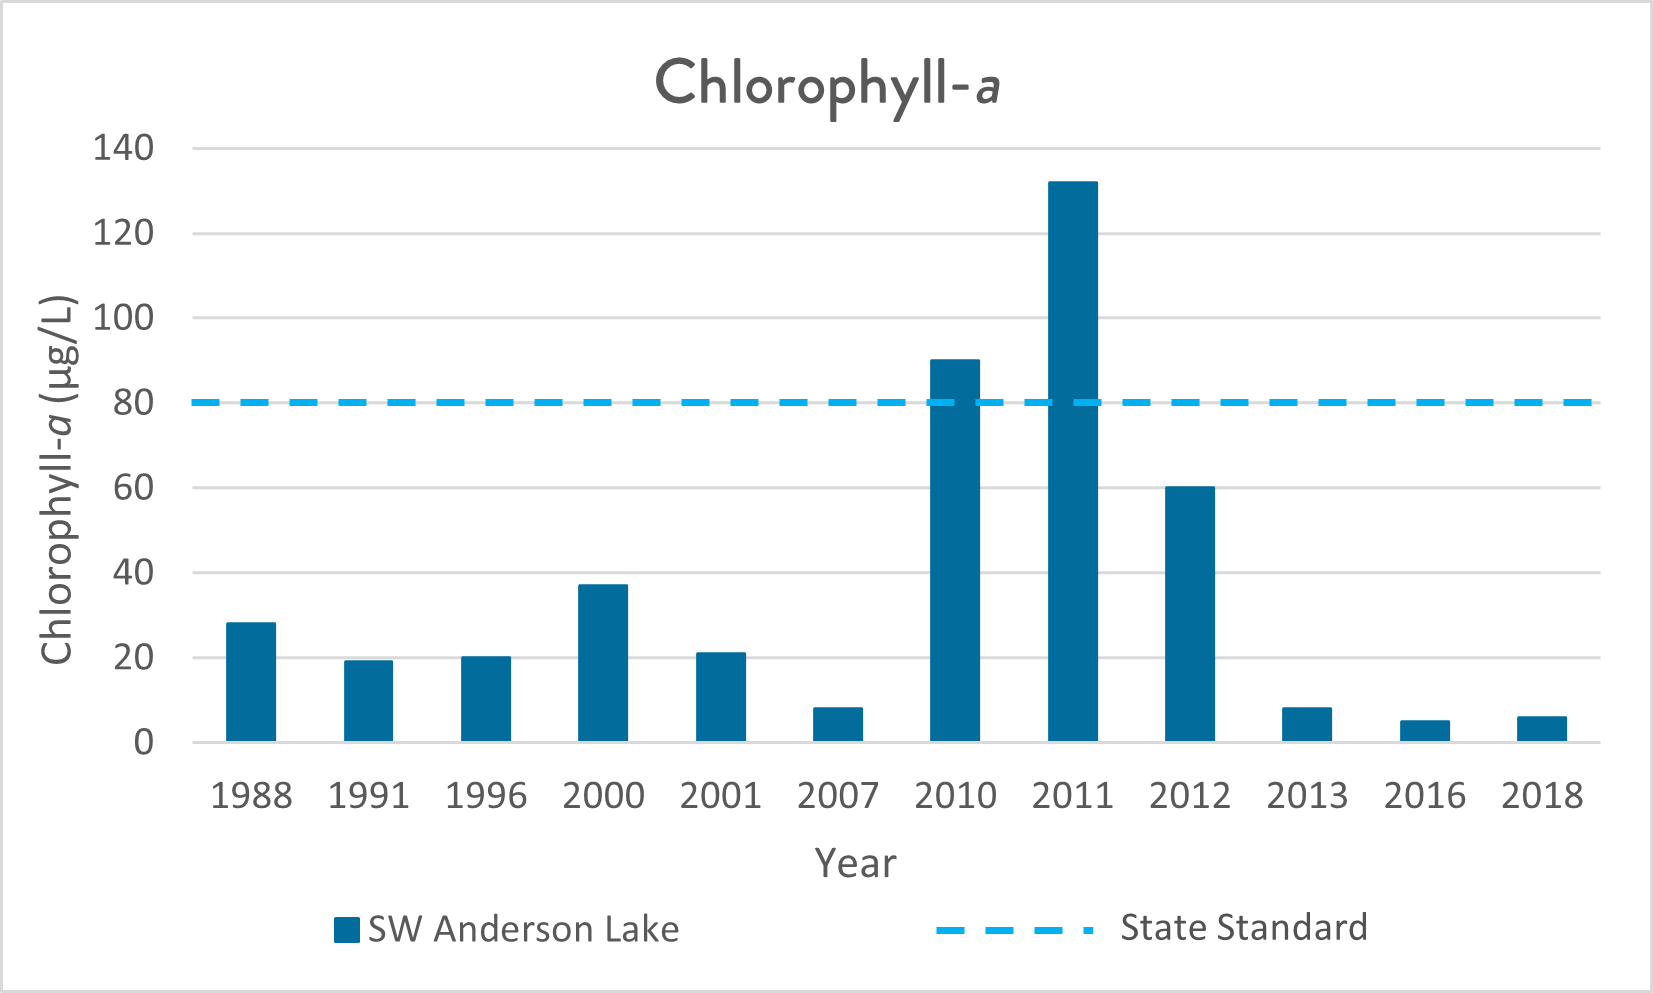 graph of chlorophyll-a levels in SW Anderson Lake from 1988 to 2018